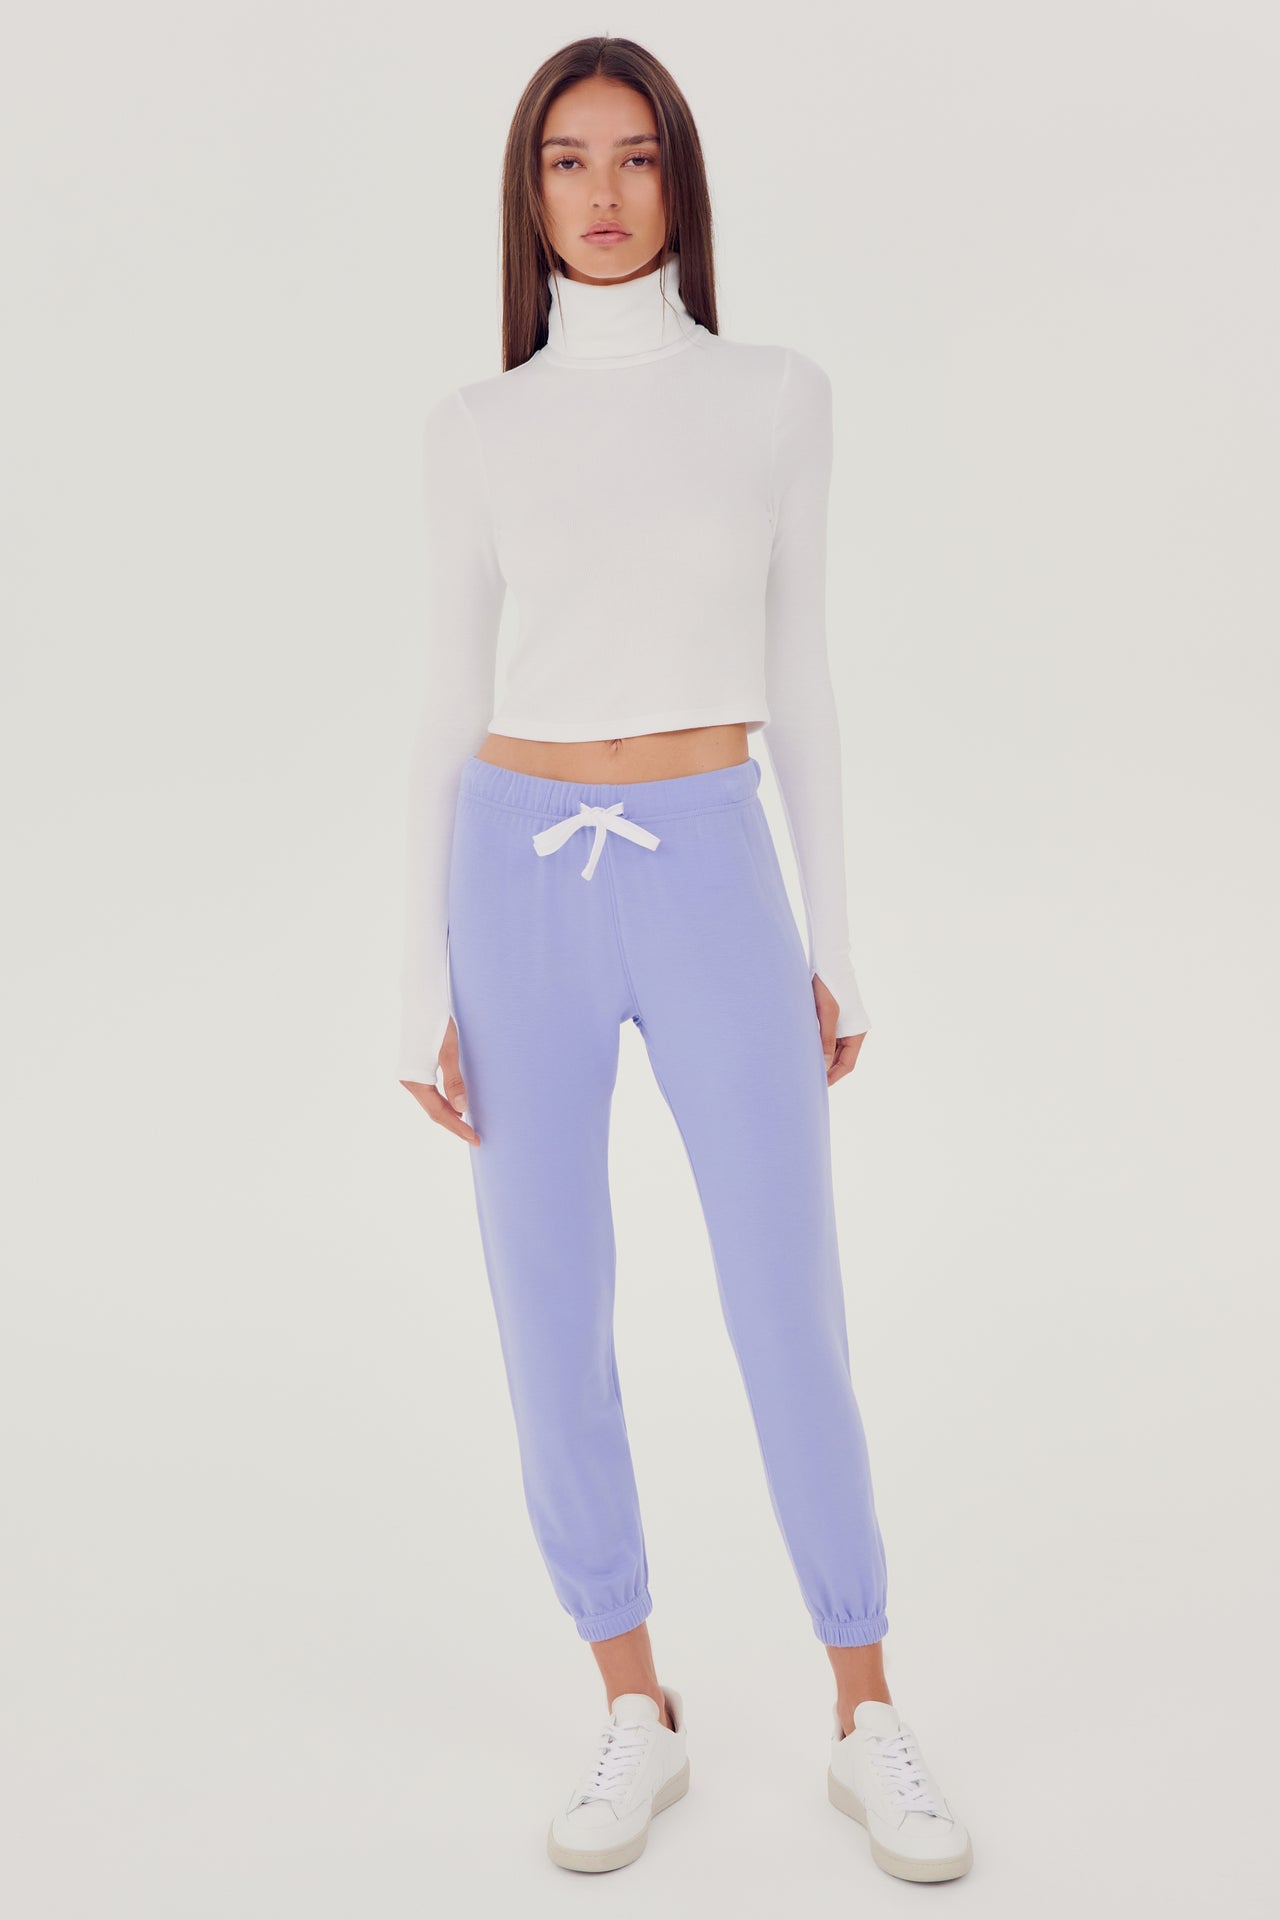 The model is wearing a white SPLITS59 Jackson Rib Cropped Turtleneck and high-waist leggings.